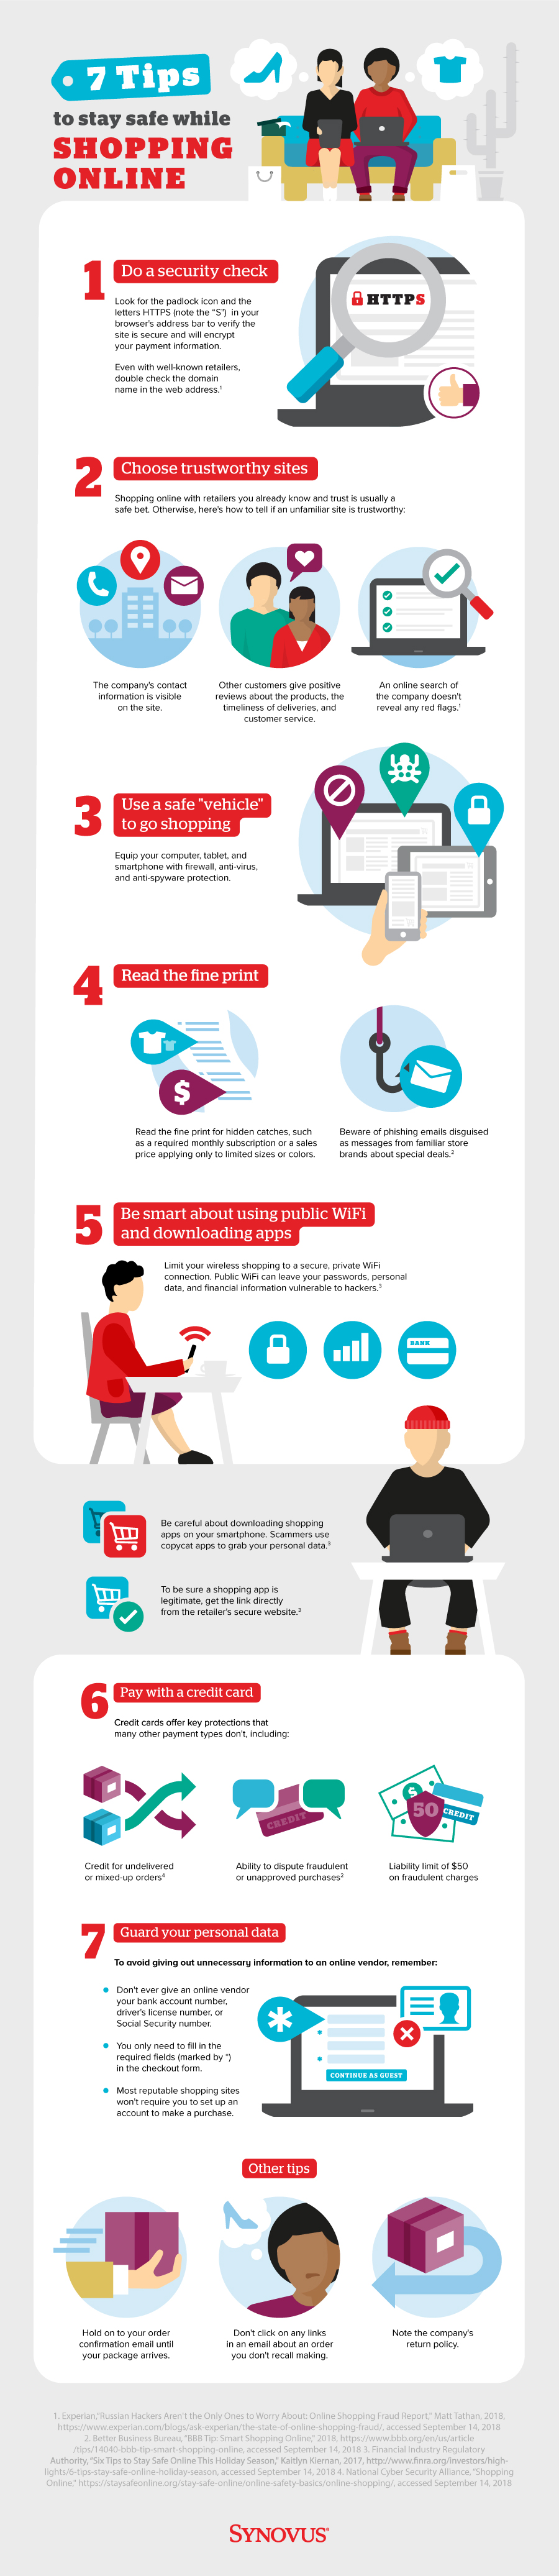 Infographic describing ways to stay safe while online shopping. A full description is available through a link beneath the image.